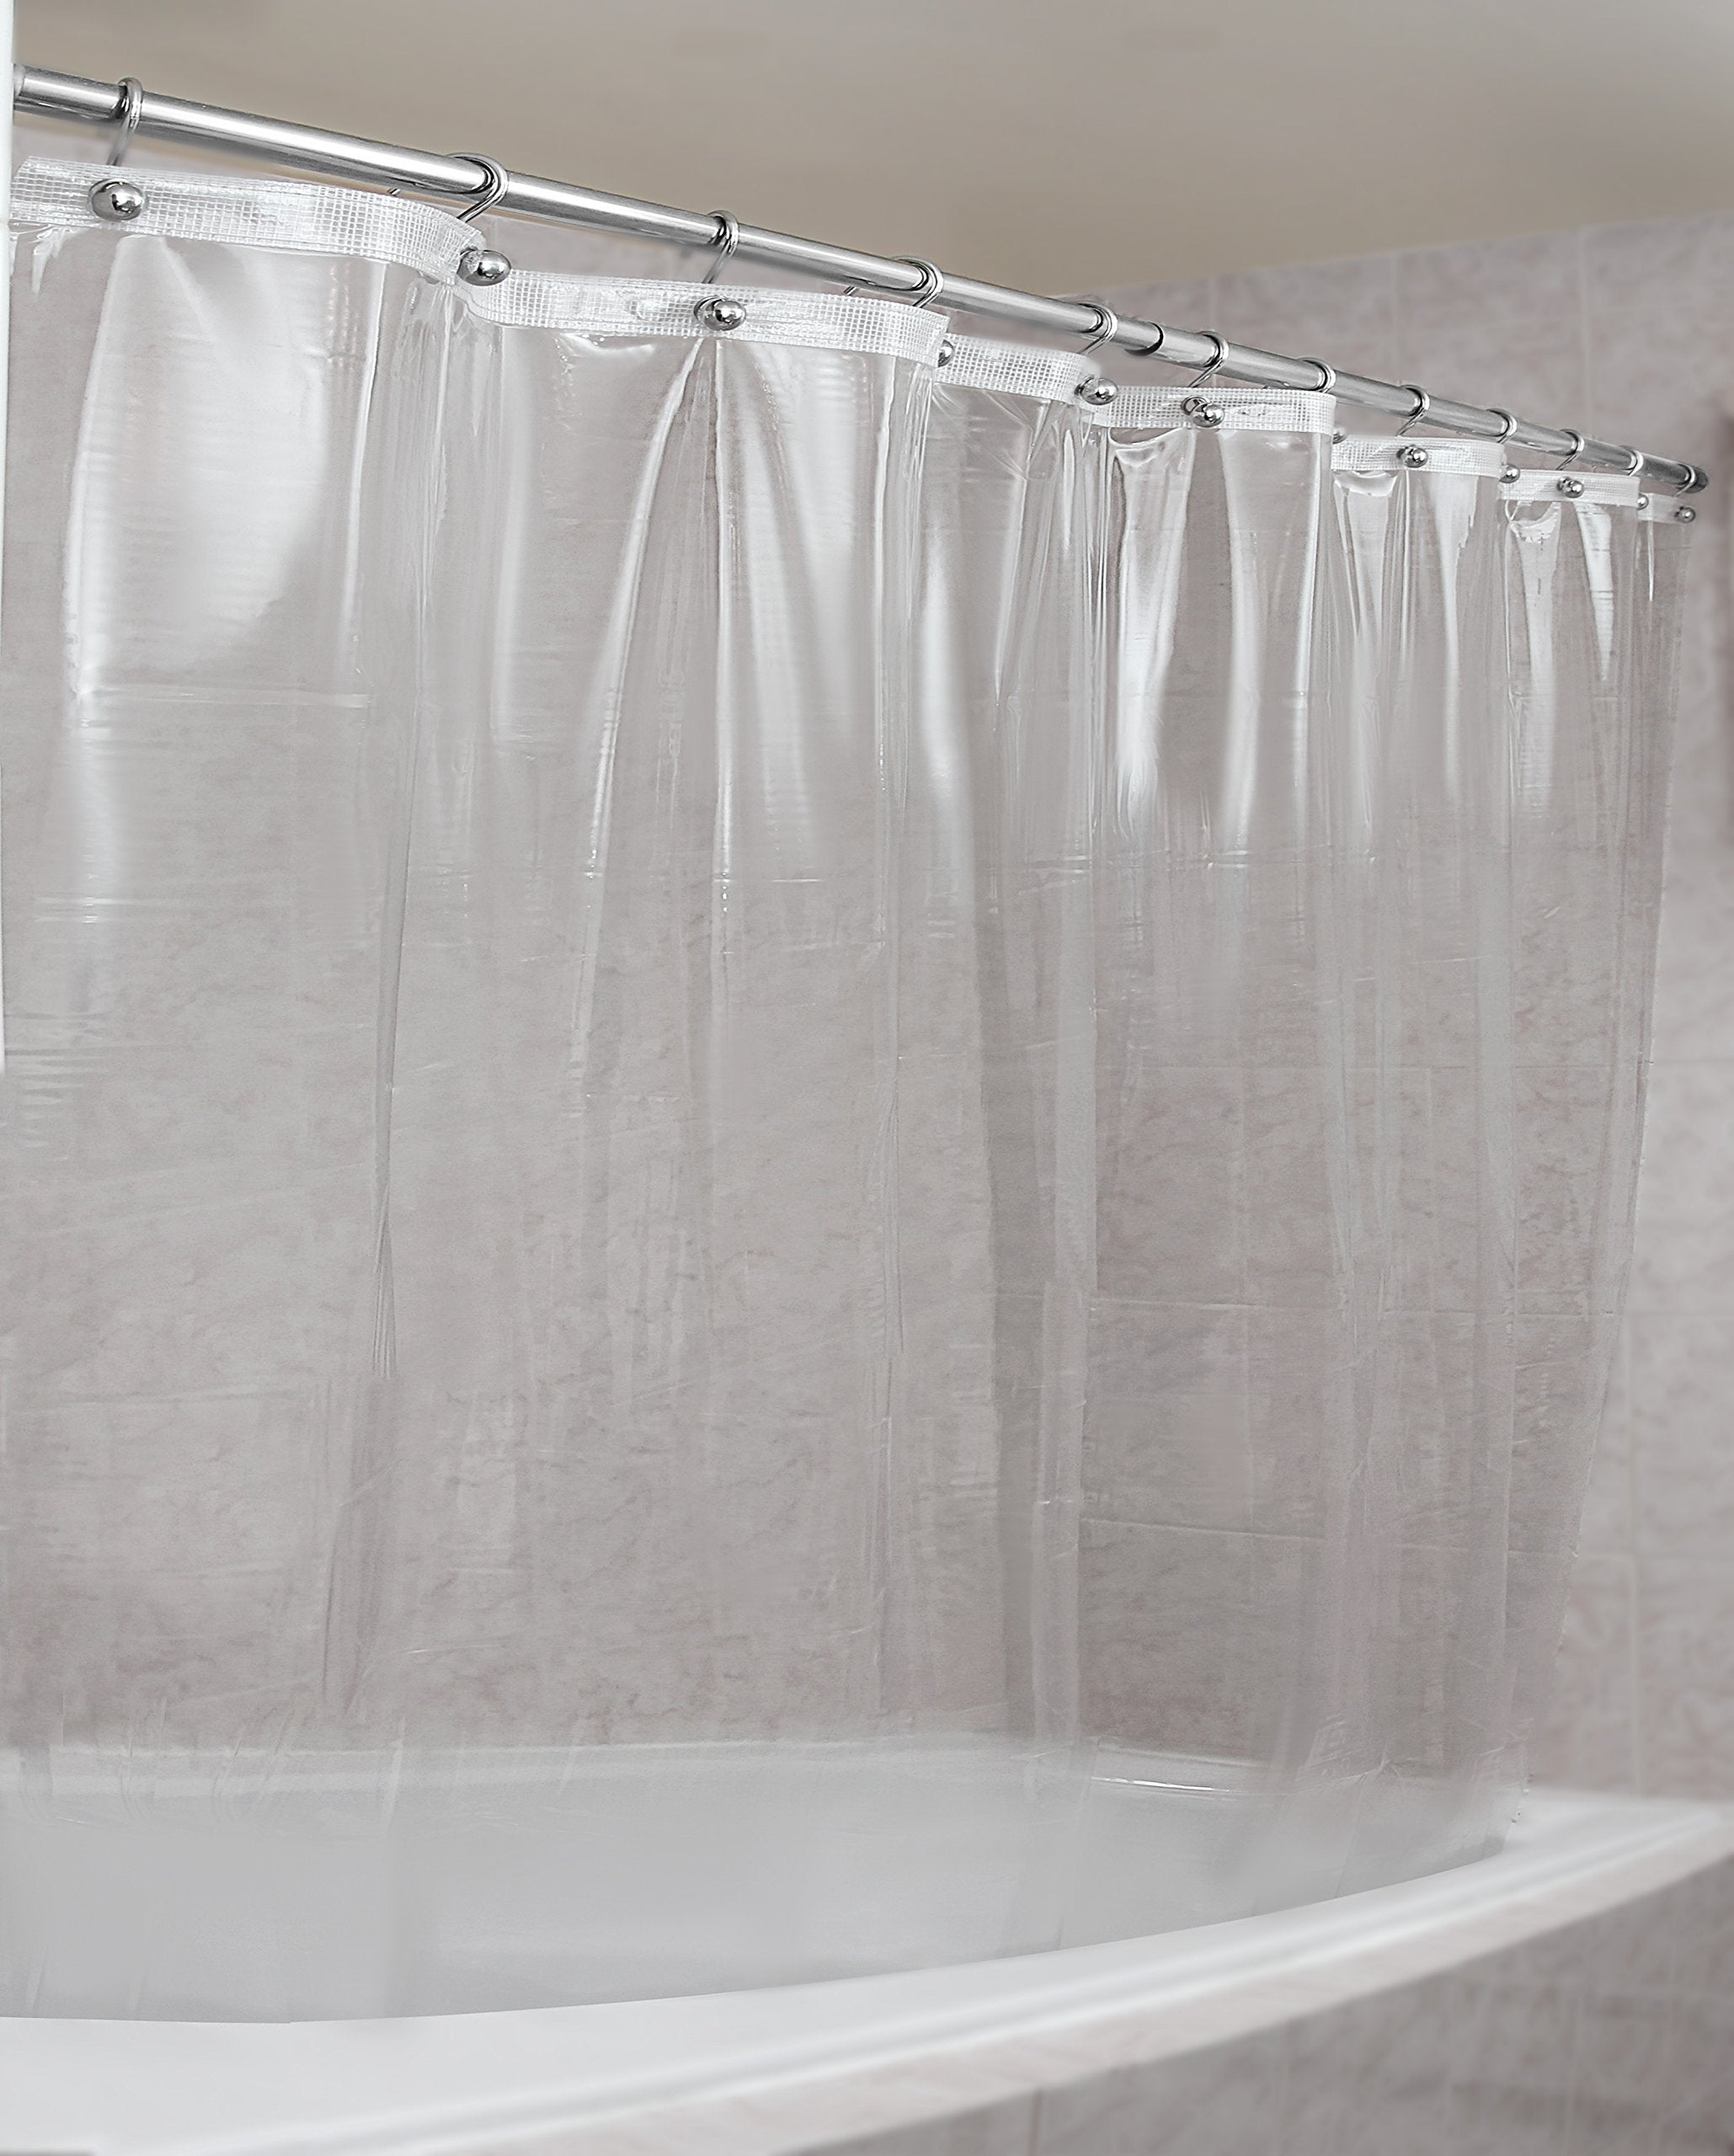 epica strongest mildew resistant shower curtain liner on the market 100 anti bacterial 10 gauge heavy duty liner waterproof 72x72 inches clear